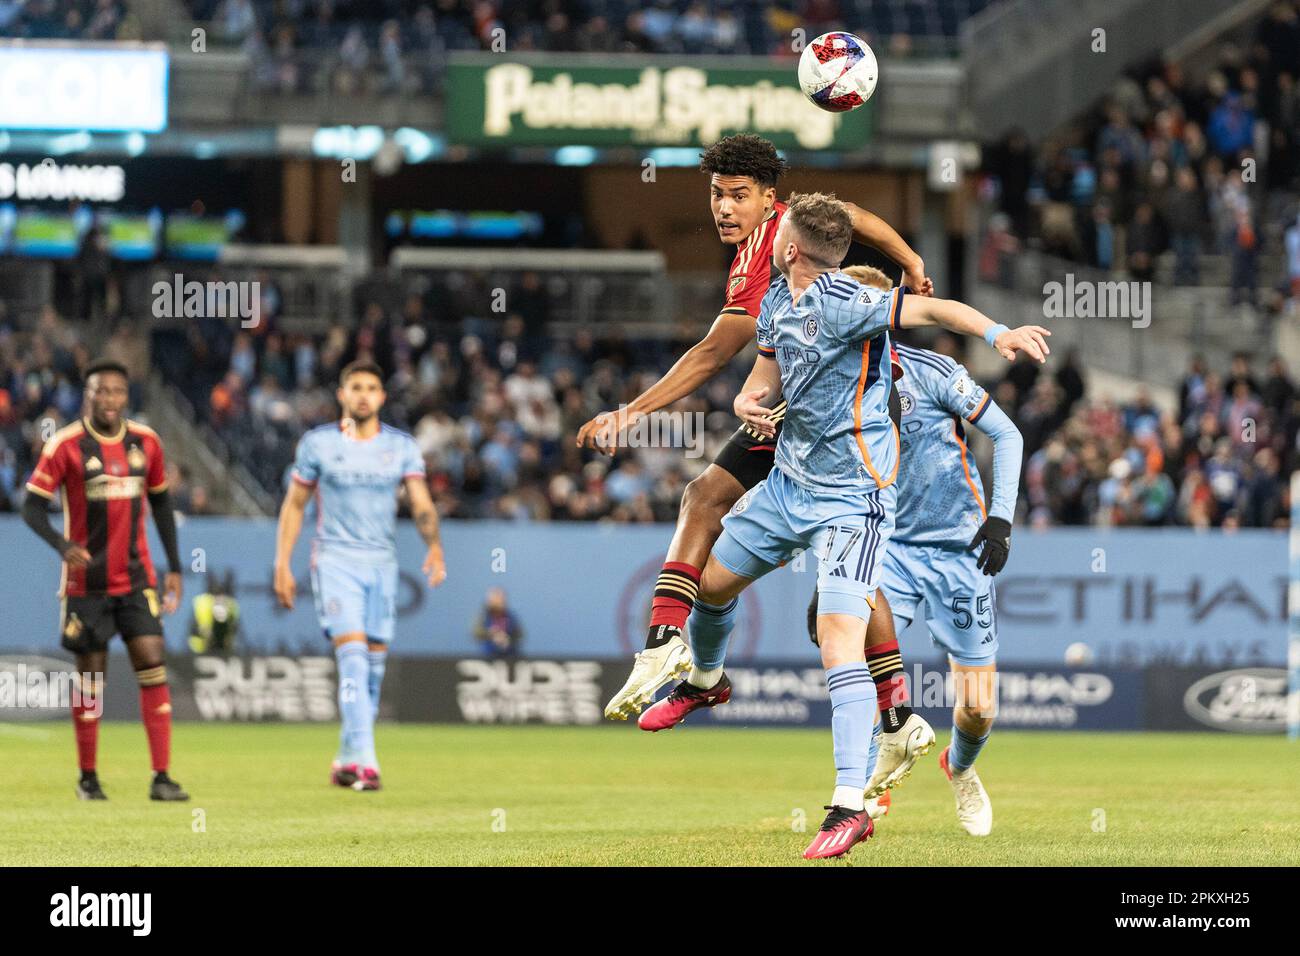 New York, United States. 08th Apr, 2023. Matias Pellegrini (17) of NYCFC and Caleb Wiley (26) of Atlanta United fight for the air ball during regular MLS season match at Yankee Stadium on April 8, 2023. Match ended in 1 - 1 draw (Photo by Lev Radin/Pacific Press) Credit: Pacific Press Media Production Corp./Alamy Live News Stock Photo